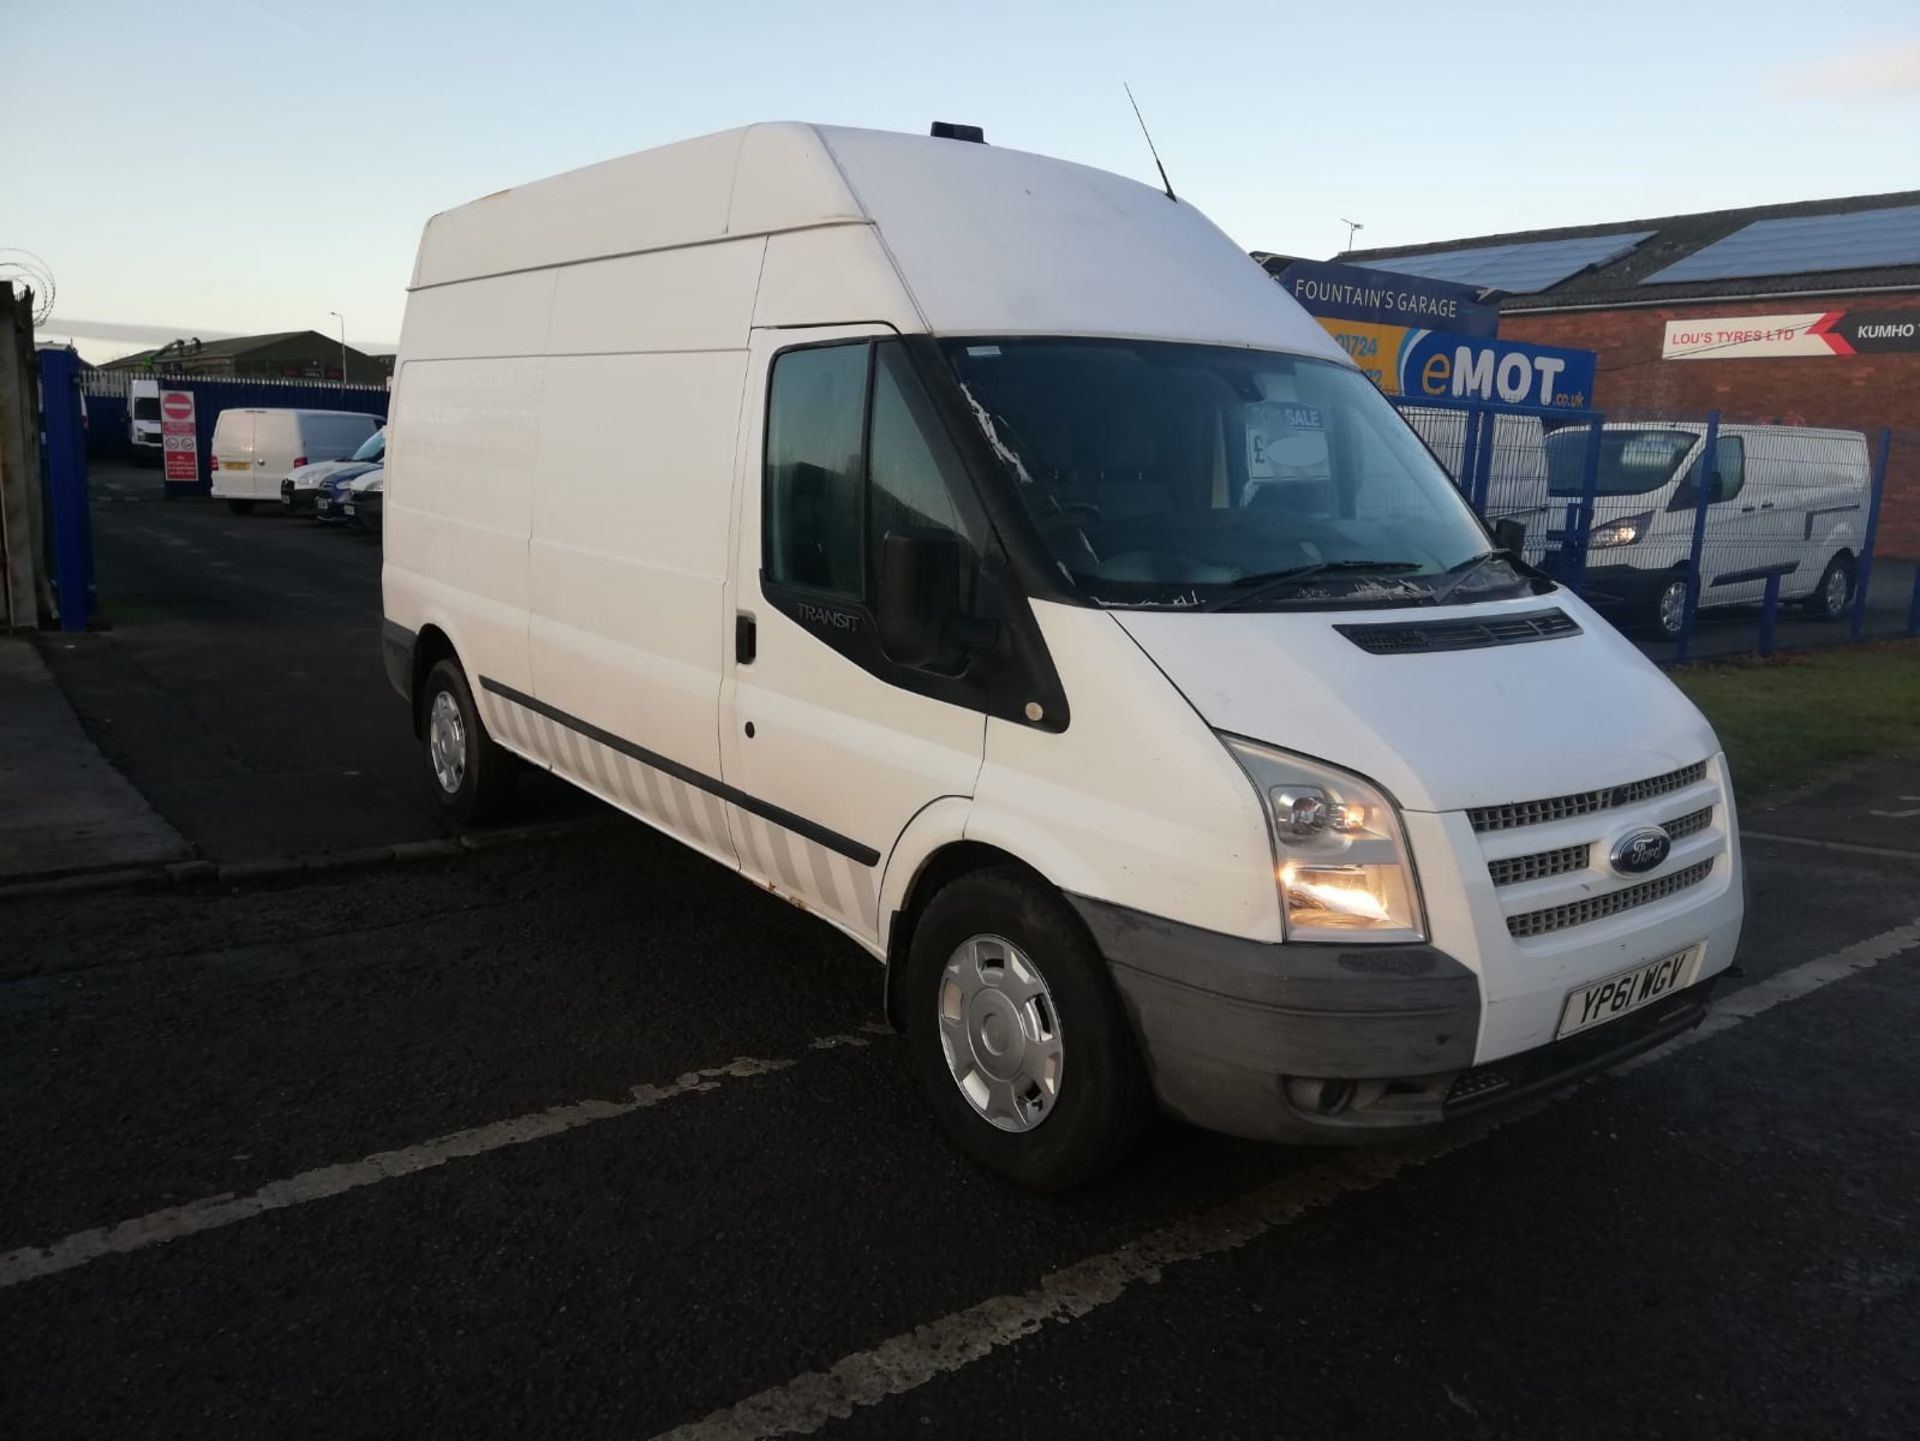 2011/61 FORD TRANSIT 125 T350 TREND FWD LWB HIGH TOP PANEL VAN, 92K MILES, REAR HIAB CRANE FITTED